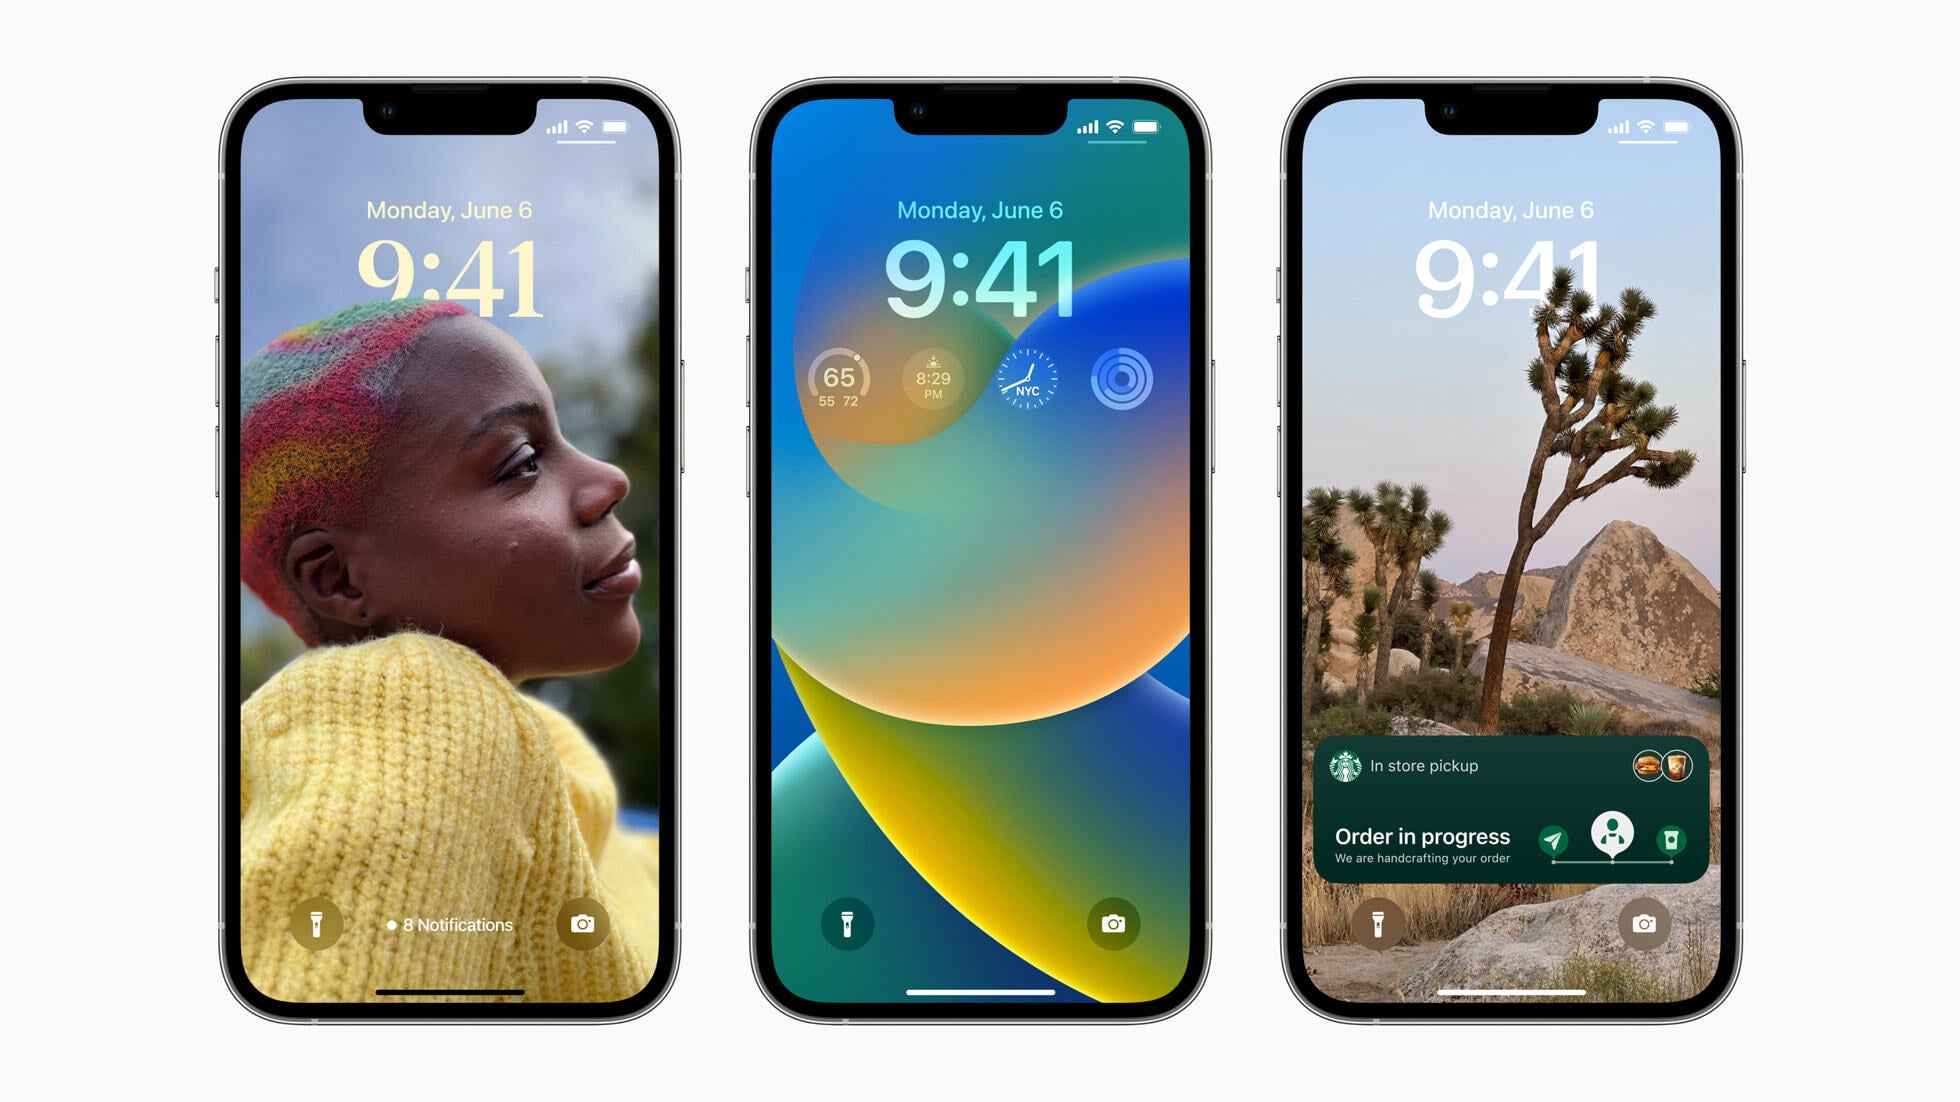 Lock screen widgets on iOS 16 have proven very useful and Android has no answer - Is Android innovation getting slower? iOS catches up and Android 14 needs to show Google cares